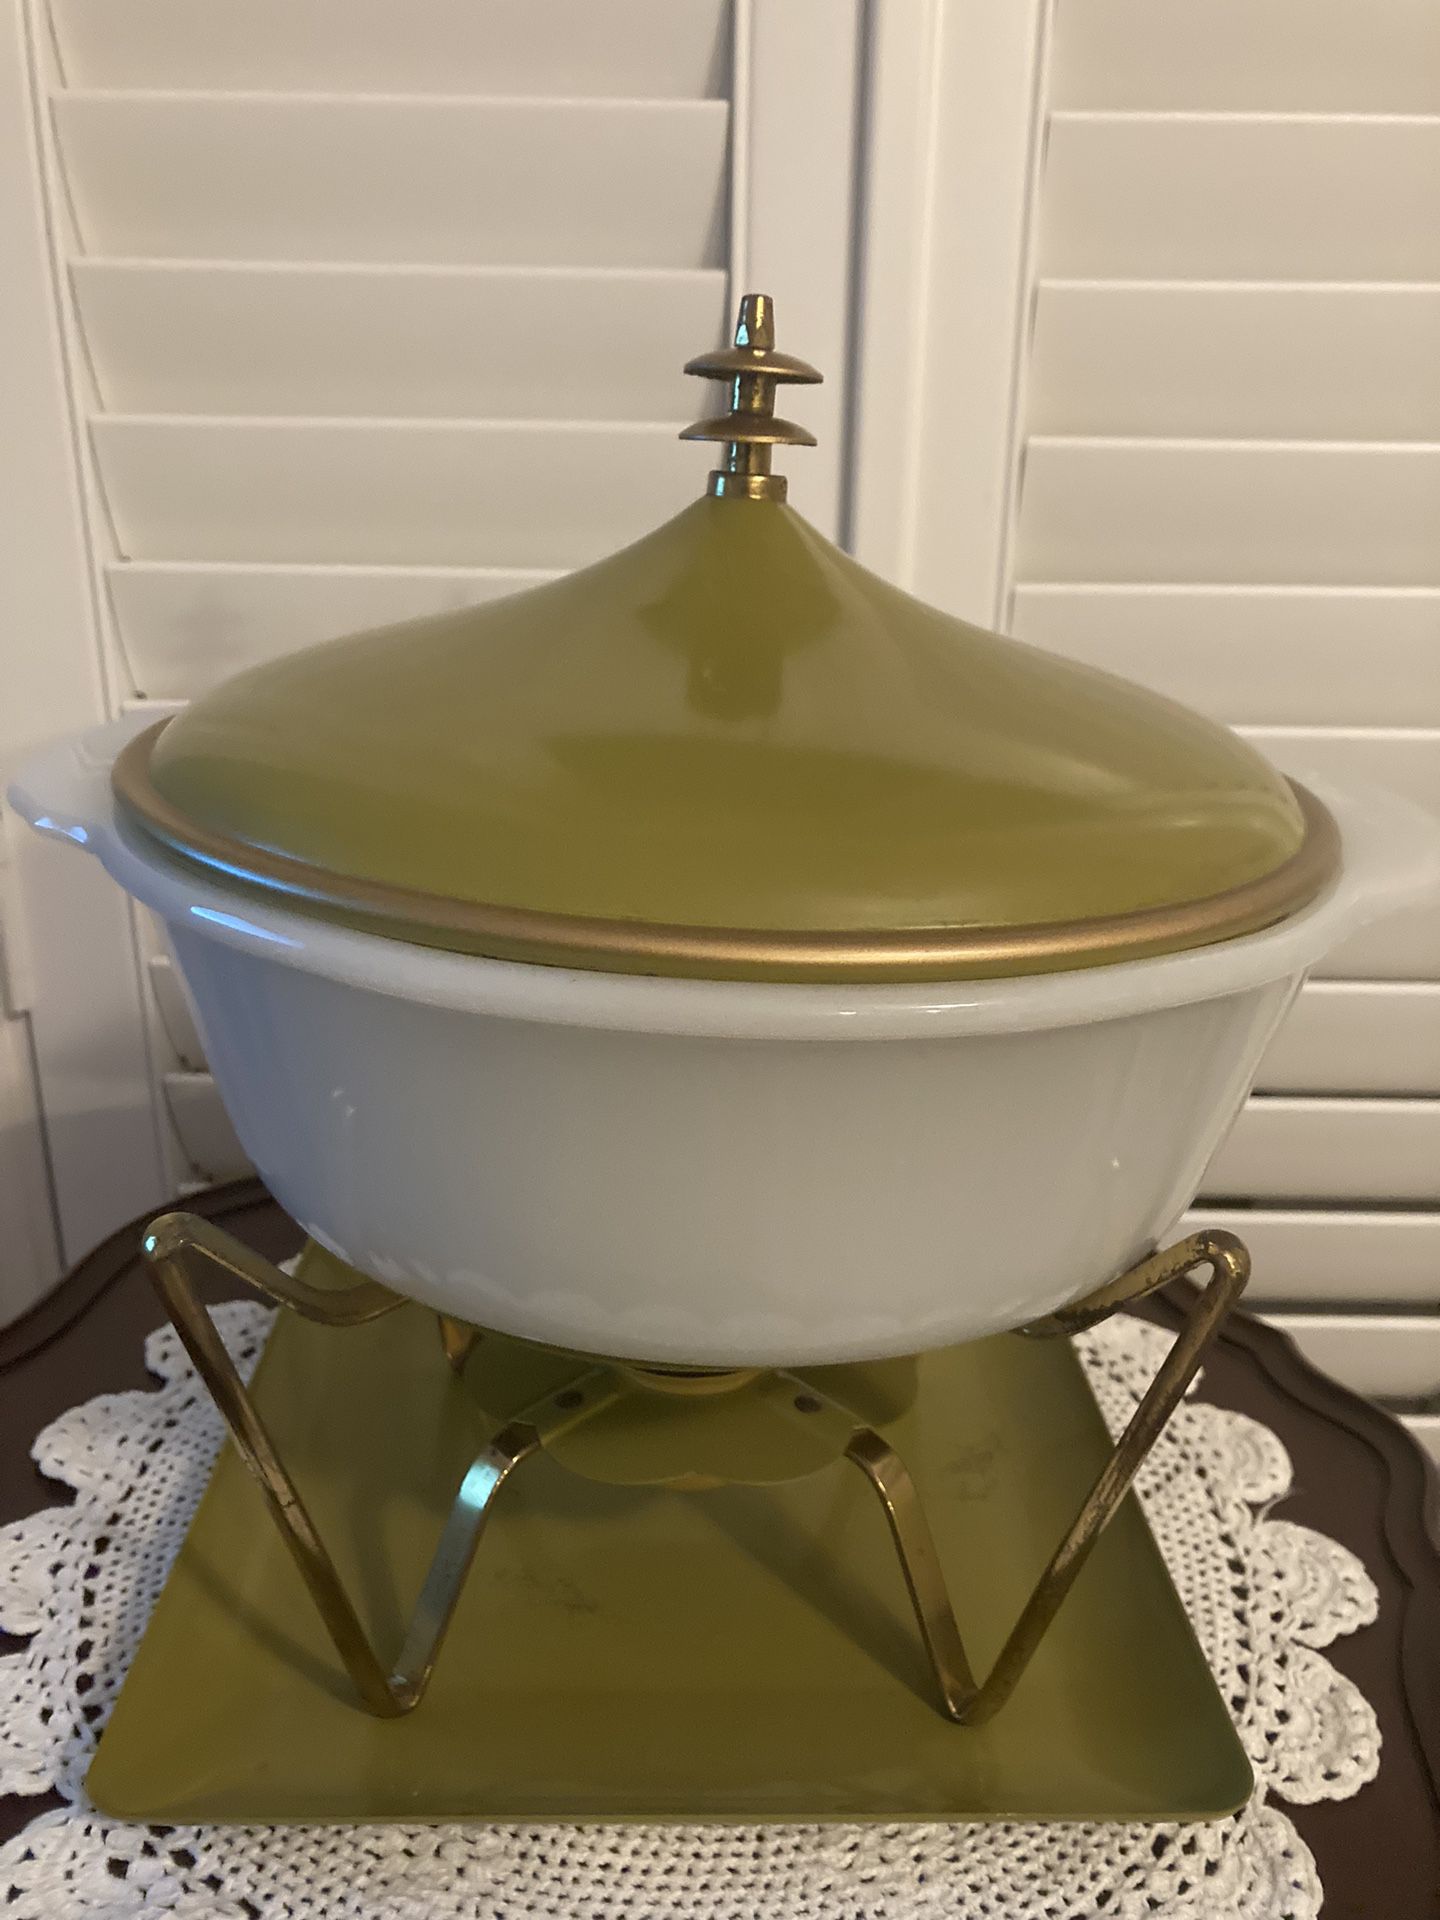 Fire King 2 Qt Chaffing Warmer Atomic Mcm Olive Green With Gold Trim.  1962